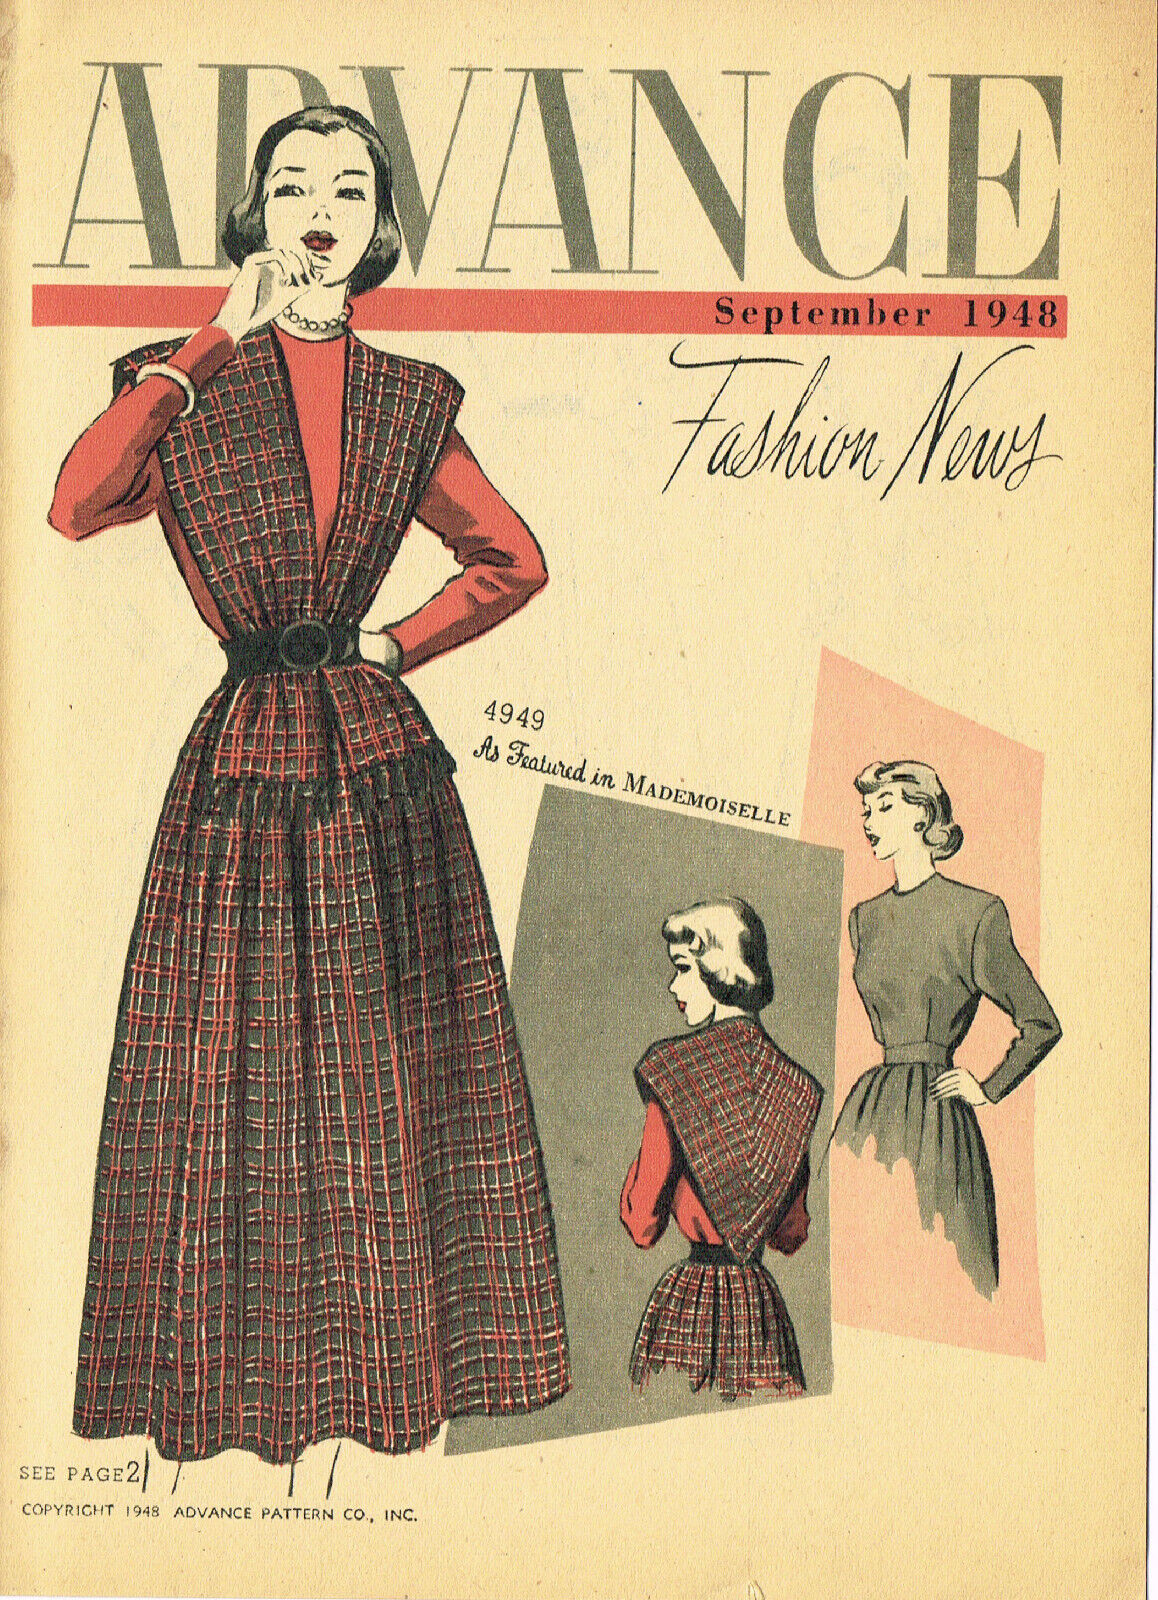 1940s Vintage Advance Fashion News Sewing Pattern Flyer 8 Pages Sep 1948 Orig